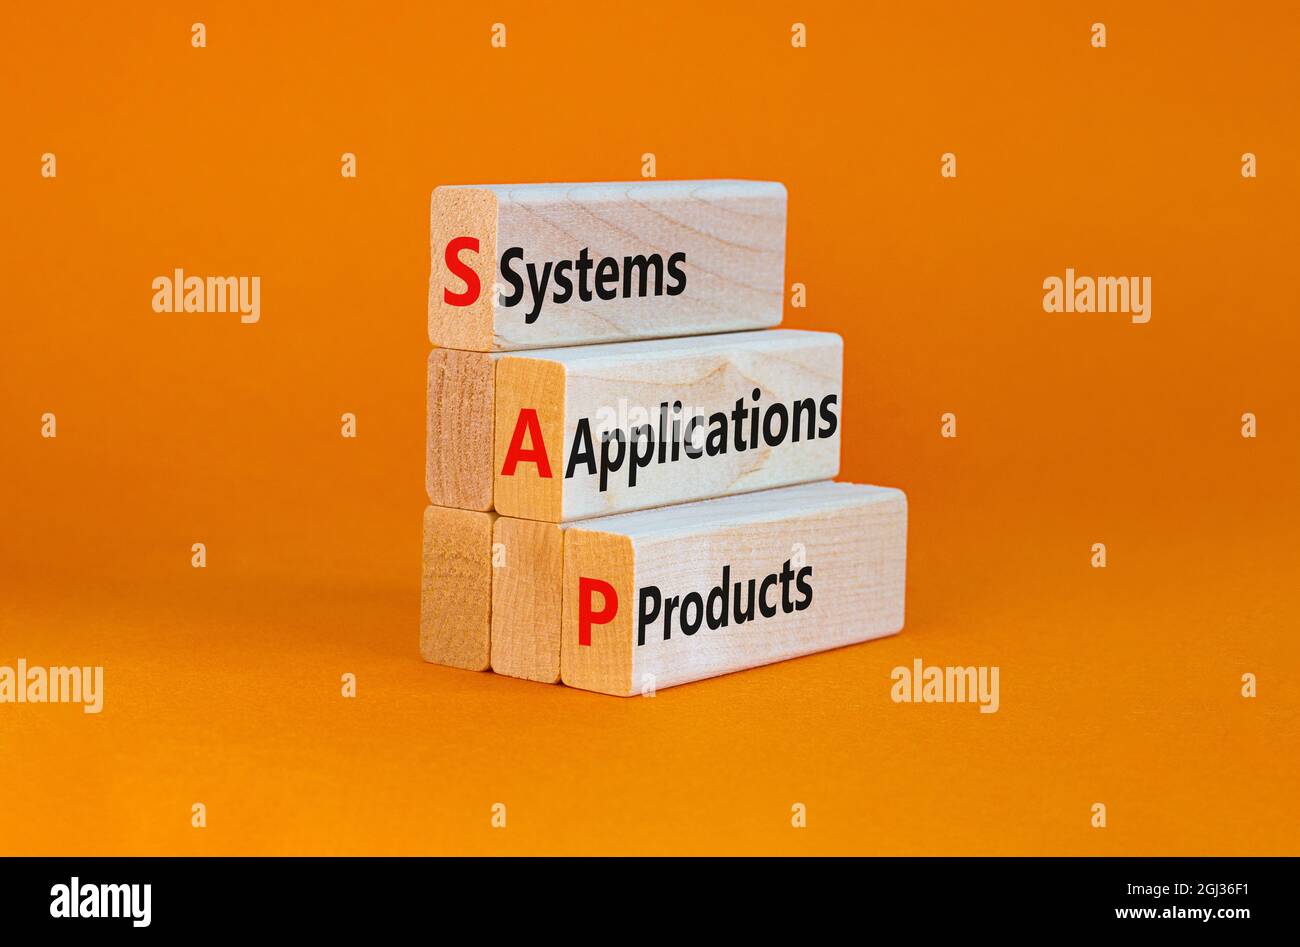 SAP, systems, applications, products symbol. Wooden blocks with words SAP, systems, applications, products. Orange background, copy space. Business an Stock Photo